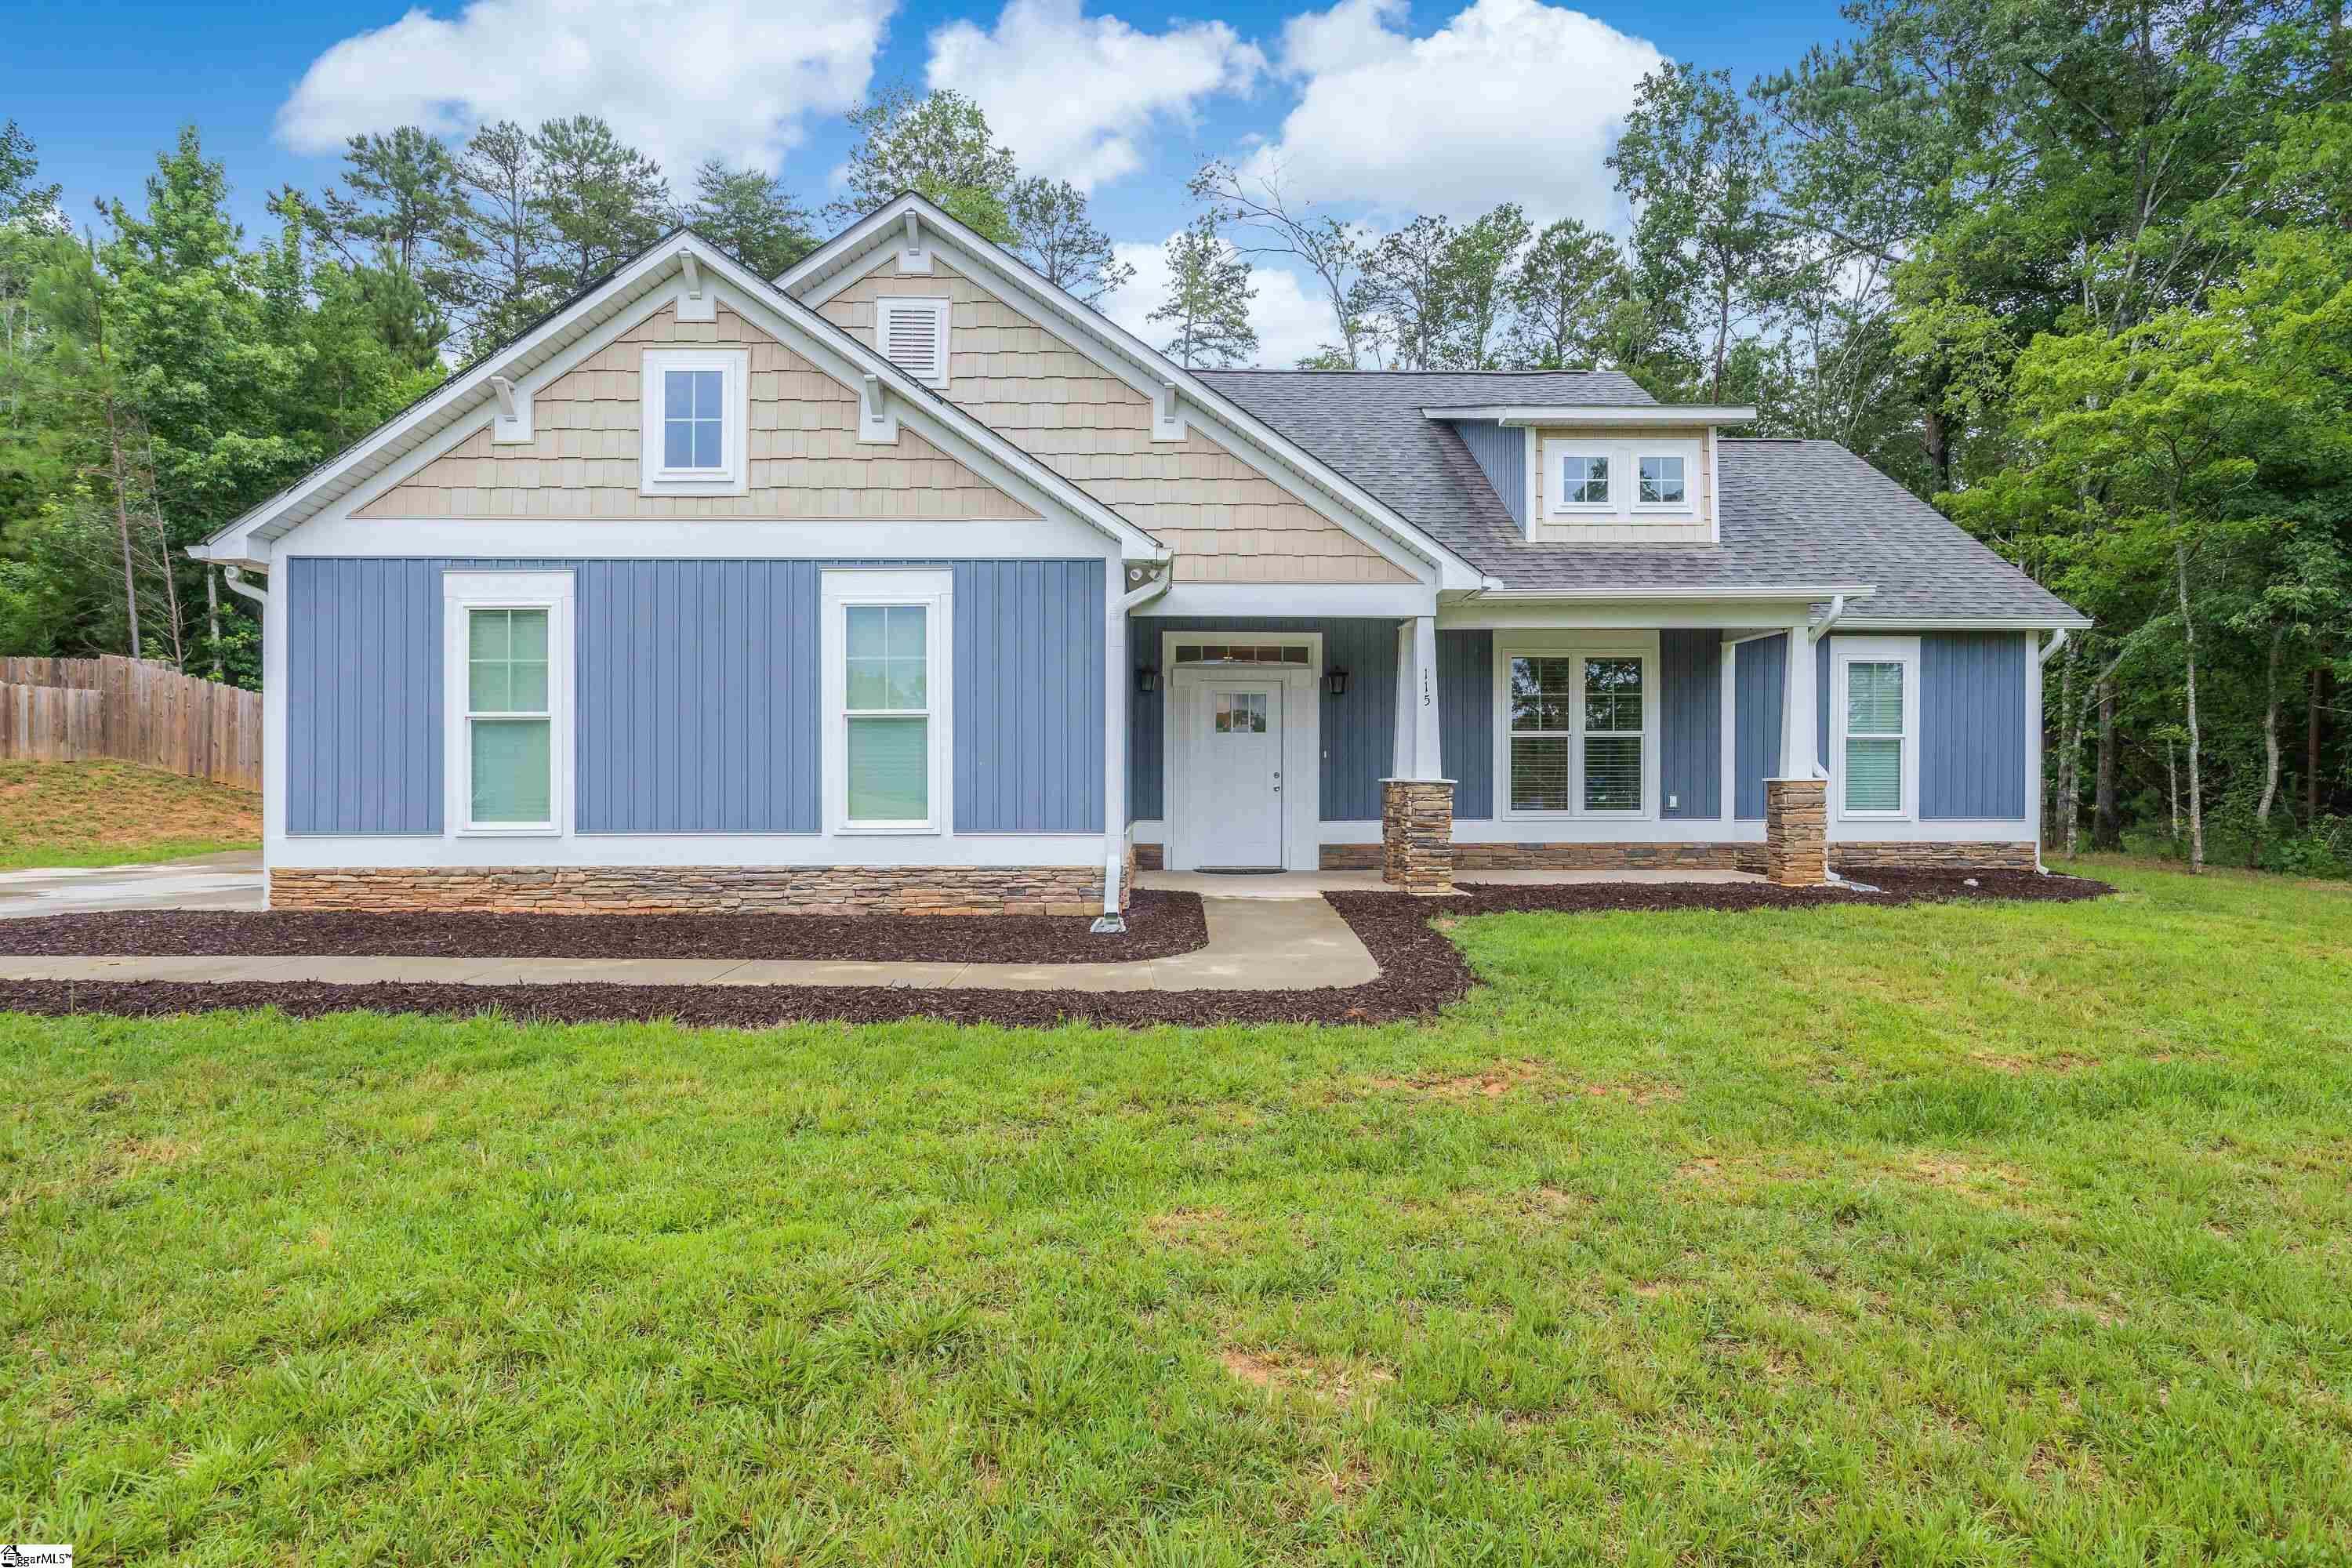 Homes for Sale in Forest Acres, SC: A Hidden Gem in Palmetto State